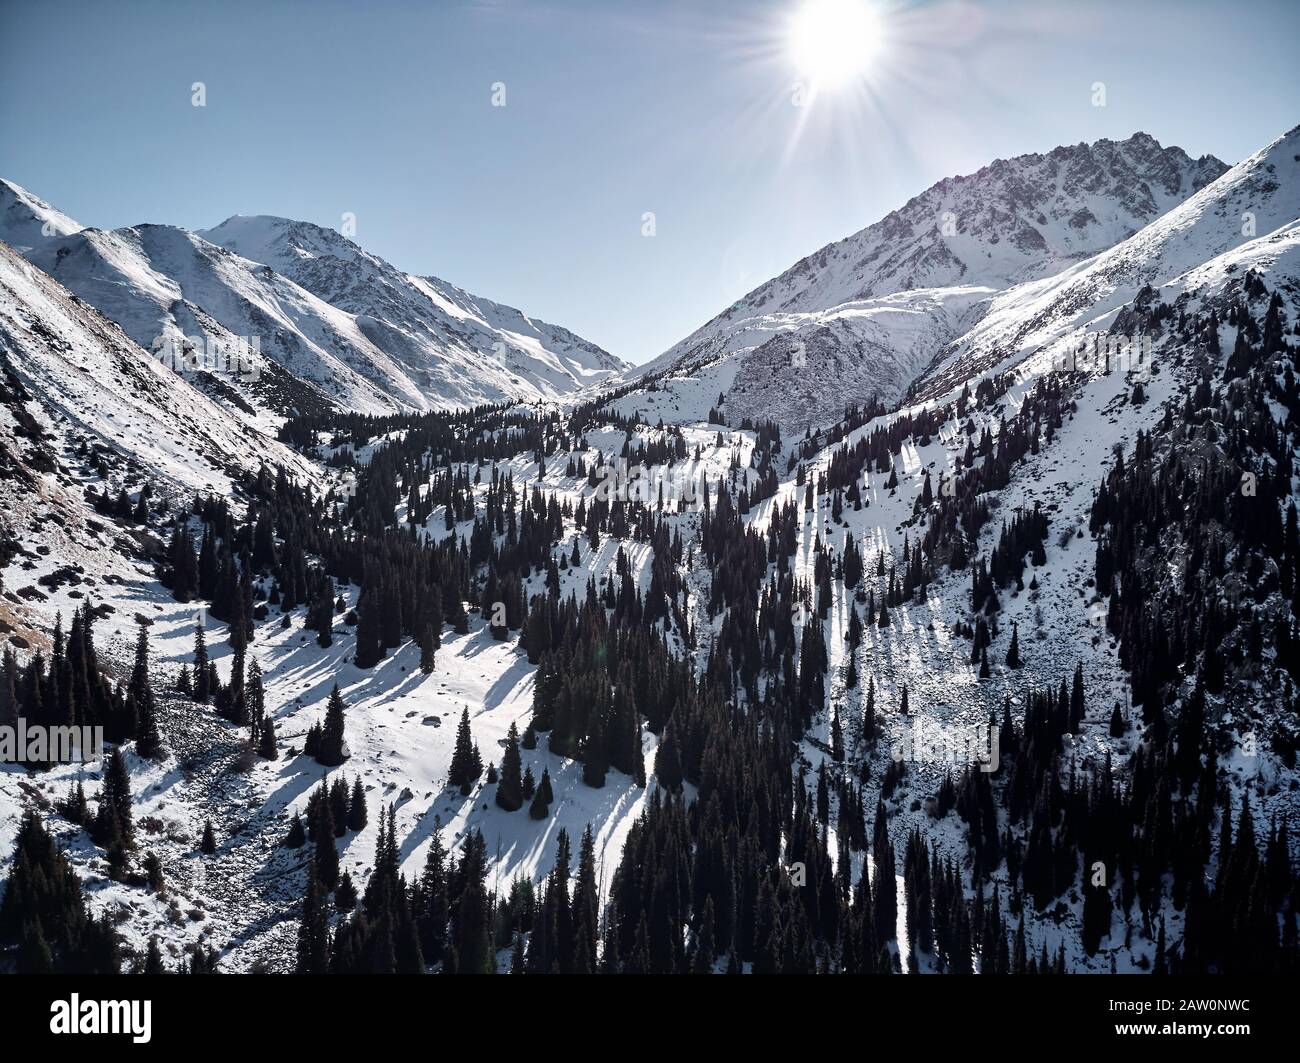 Aerial view of the winter mountain landscape in sunny day at Almarasan gorge in Almaty, Kazakhstan. Stock Photo